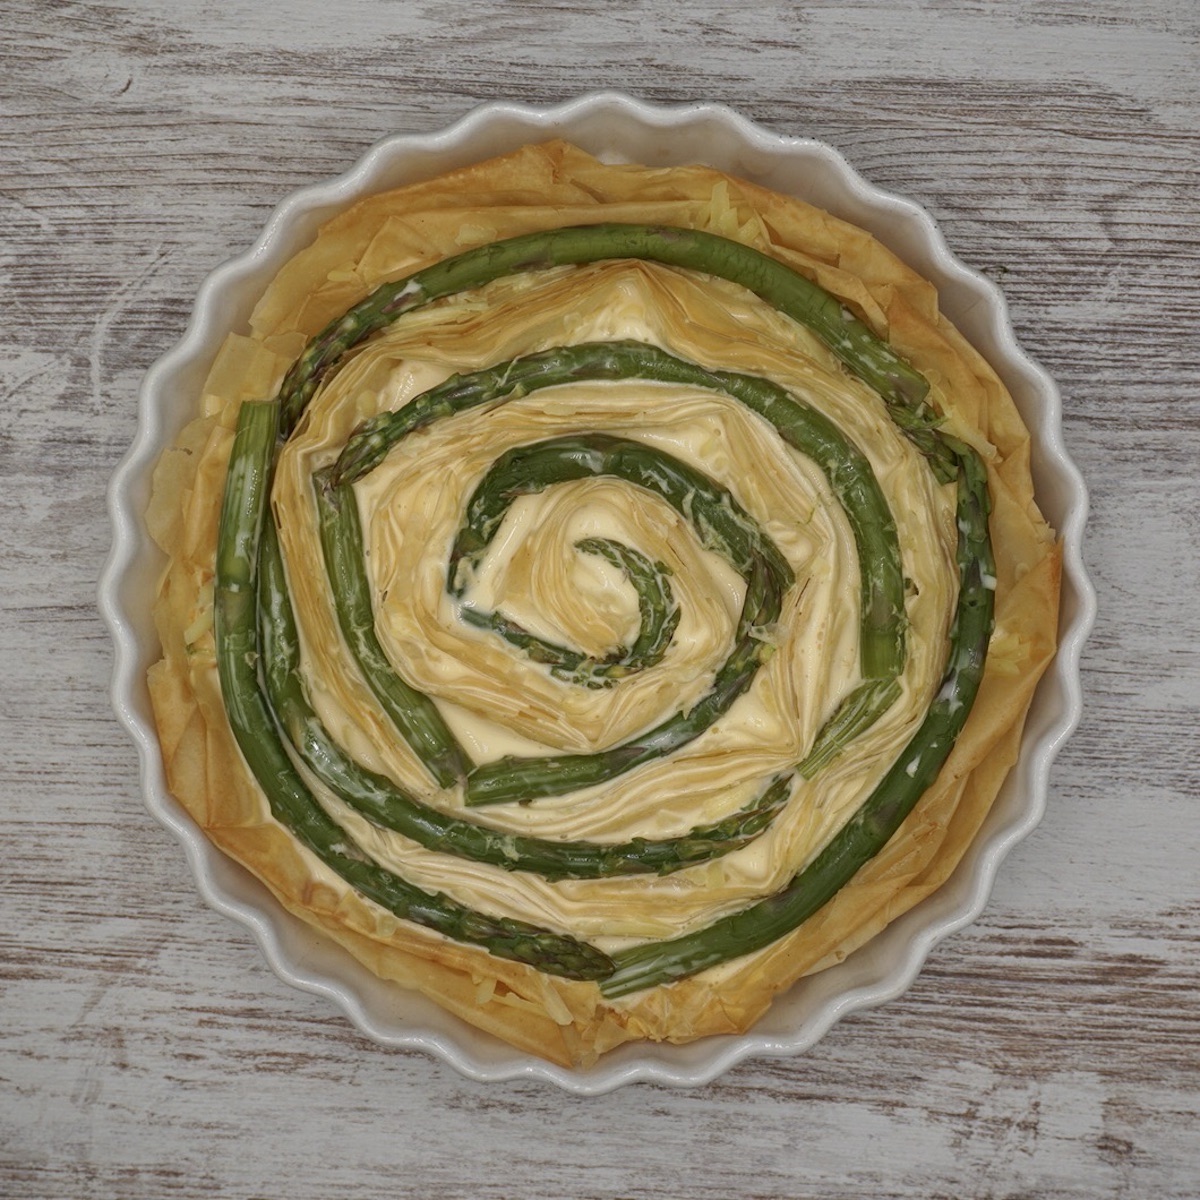 An unbaked filo quiche with asparagus formed in a spiral.